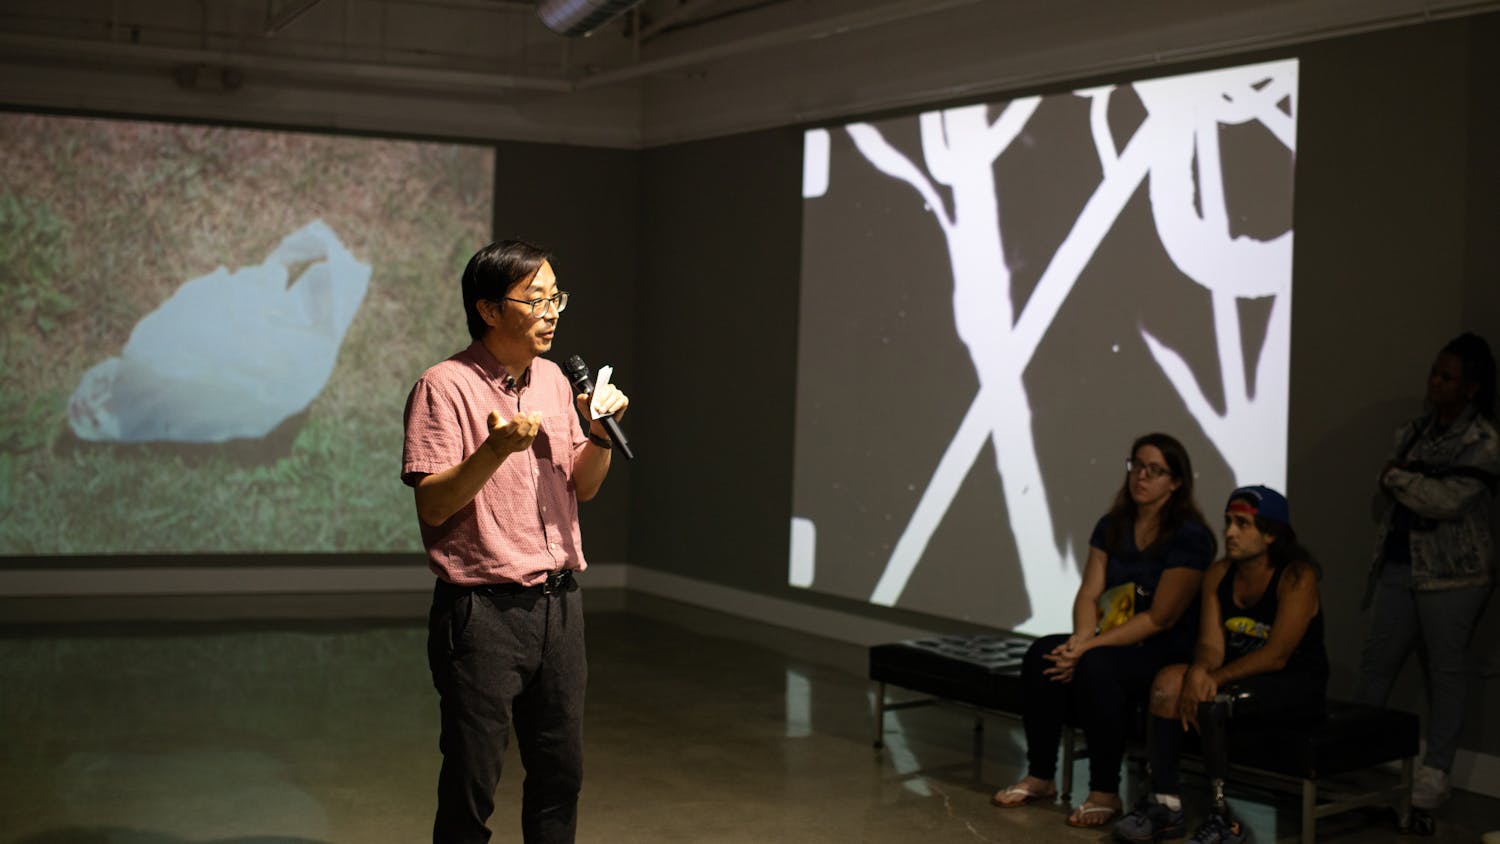 Media artist and UB faculty member Carl Lee discusses his newest project "Unity Island."